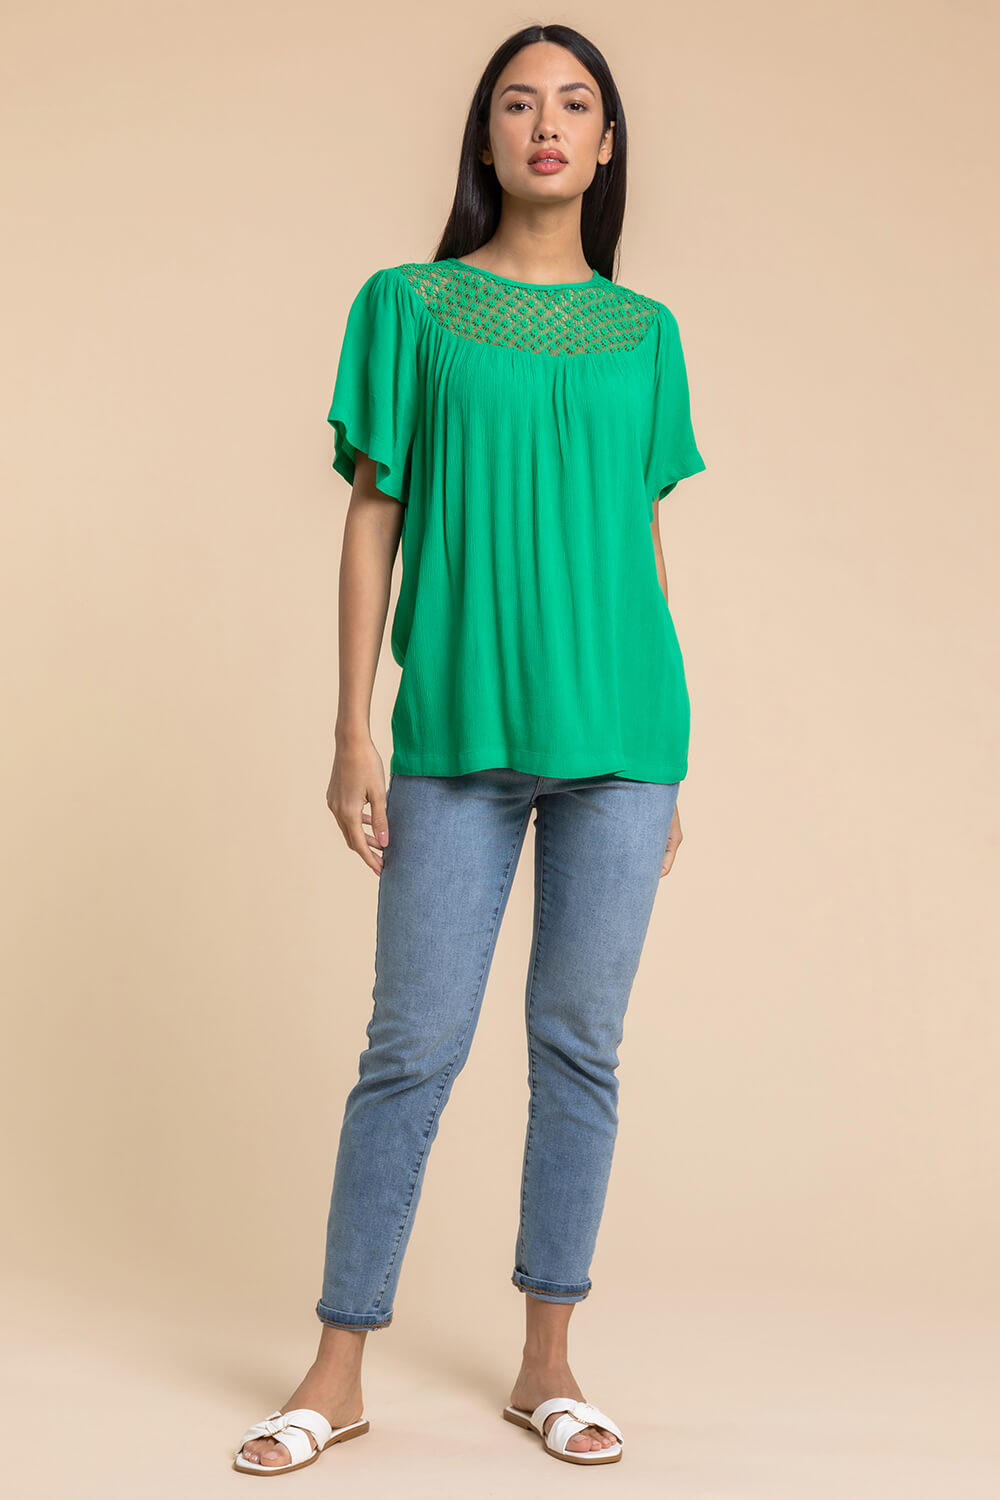 Green Lace Panel Tunic Top, Image 3 of 5